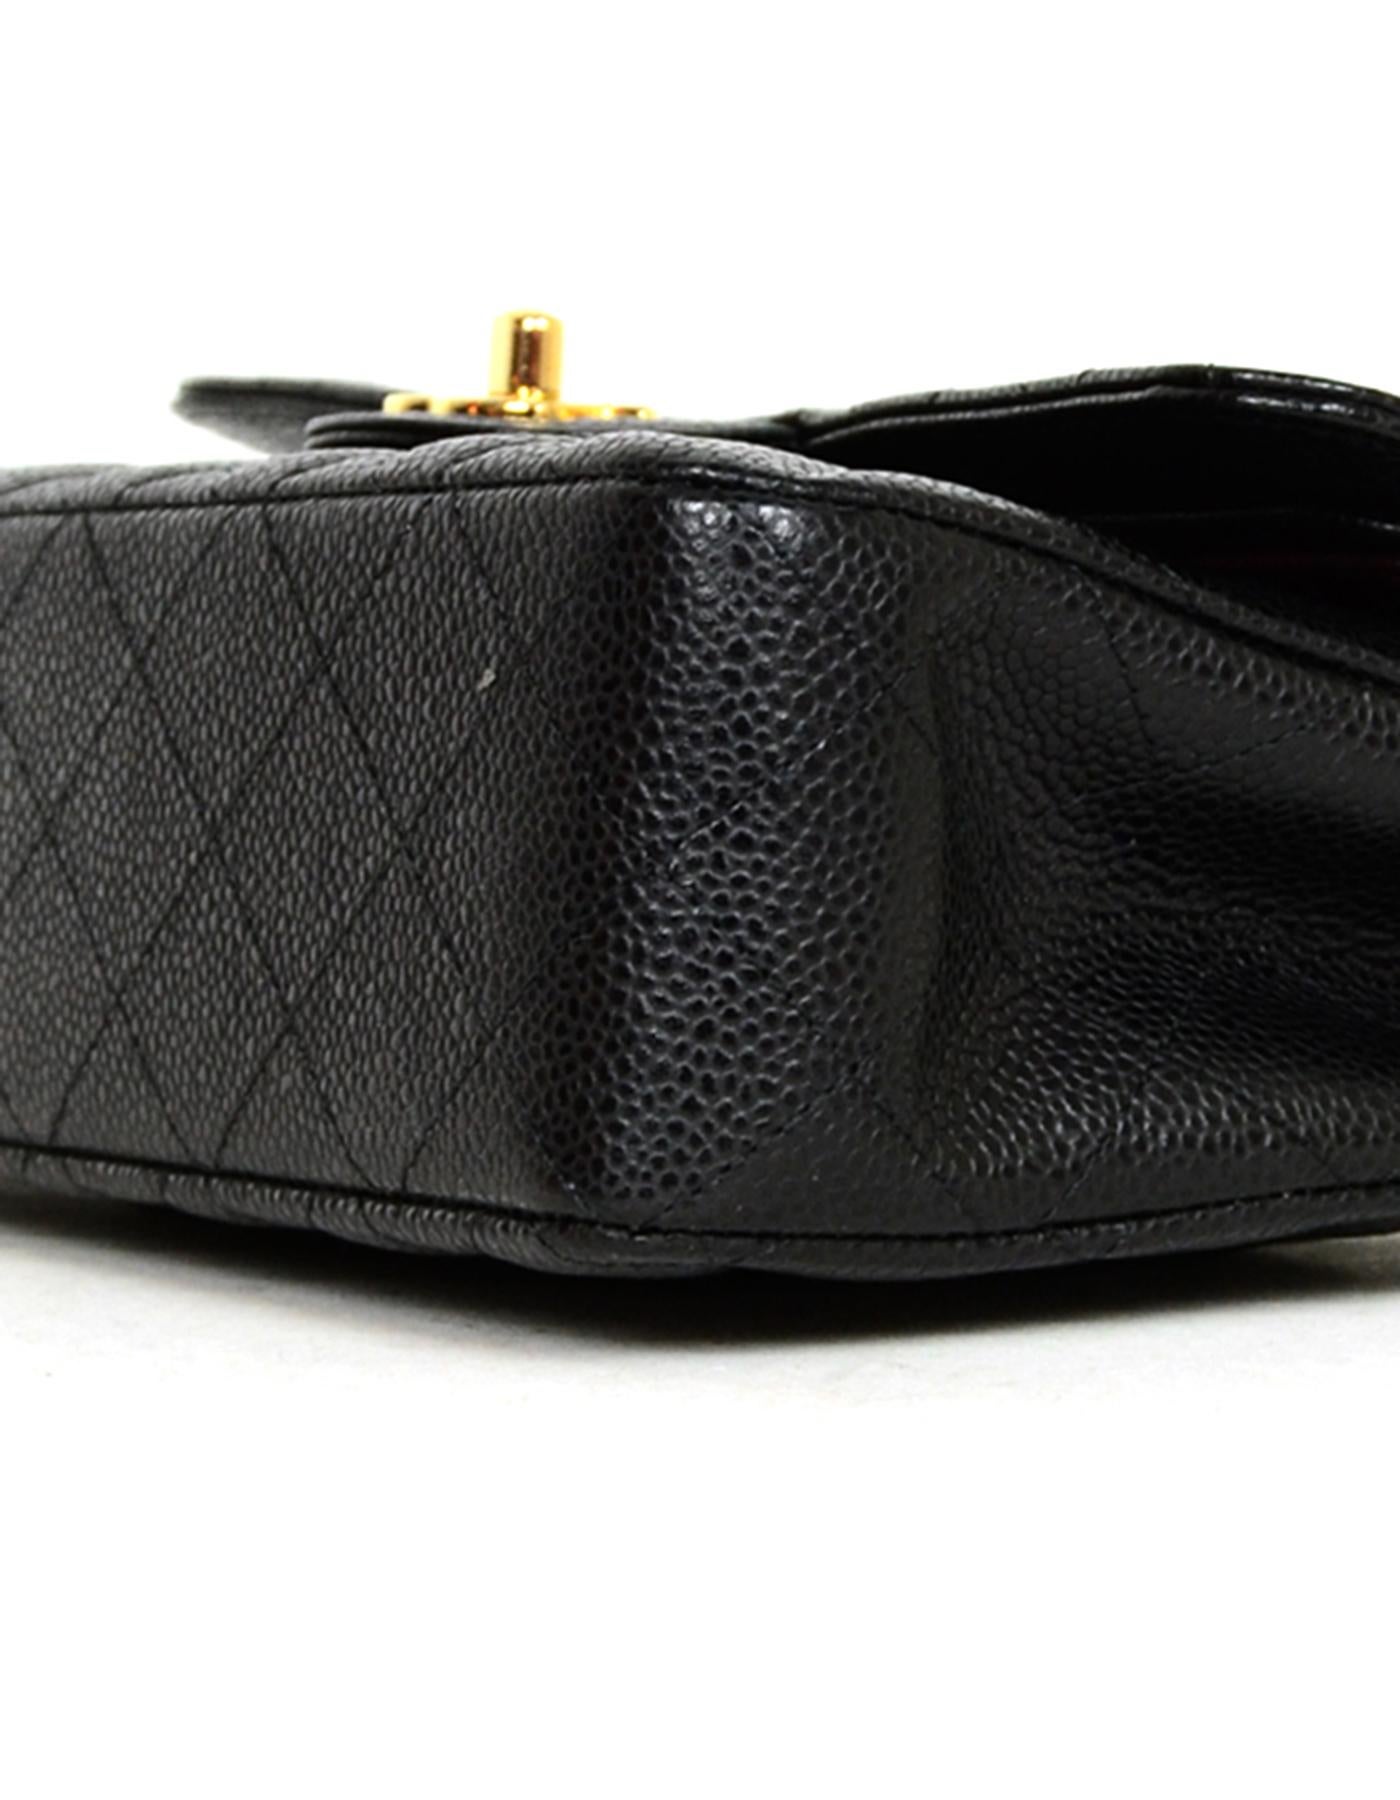 Chanel Black Quilted Caviar Leather 9